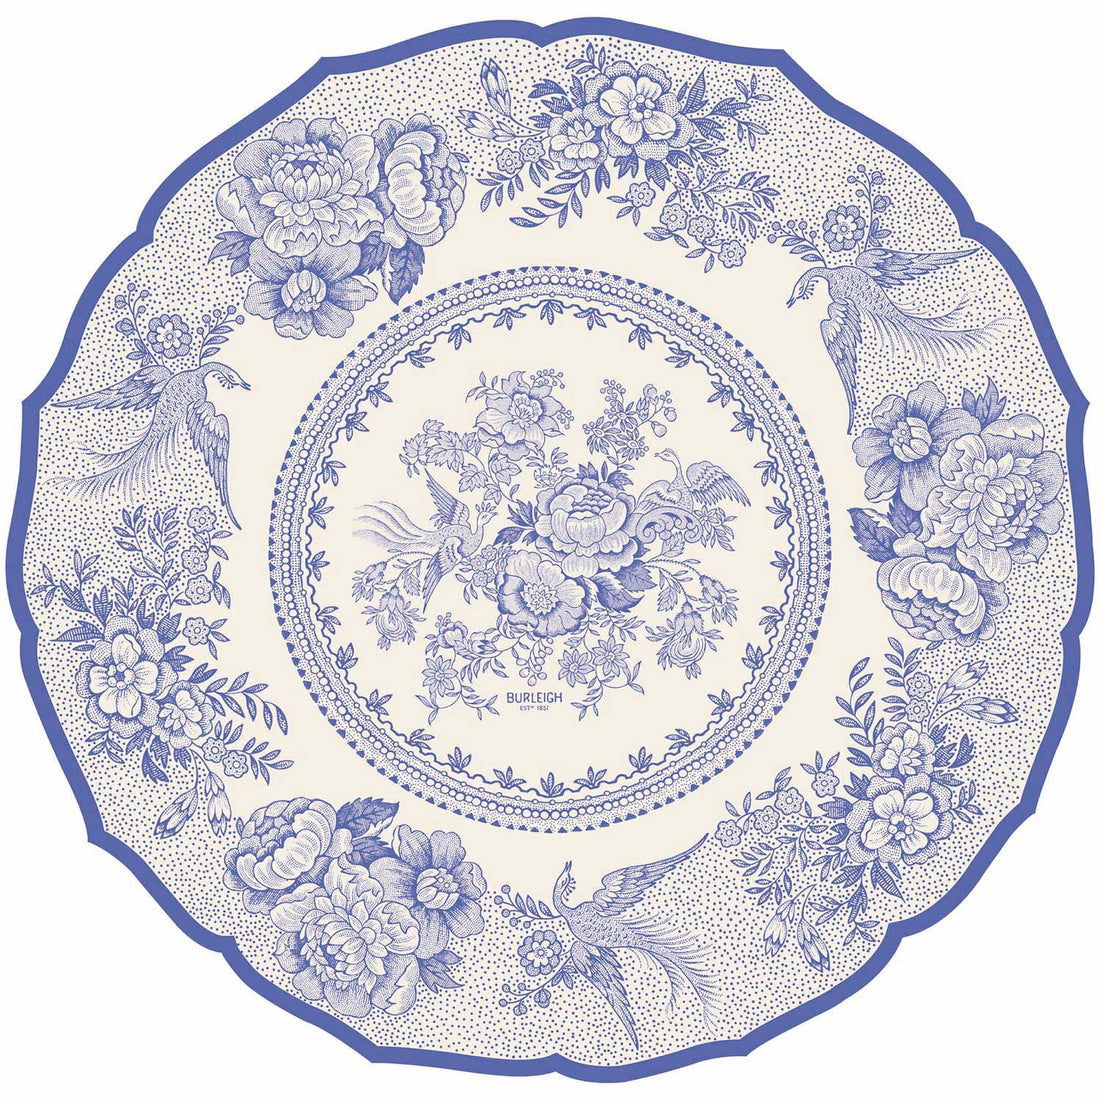 A round design with a scalloped edge, resembling a vintage plate with blue linework of flowers and birds on a white background.